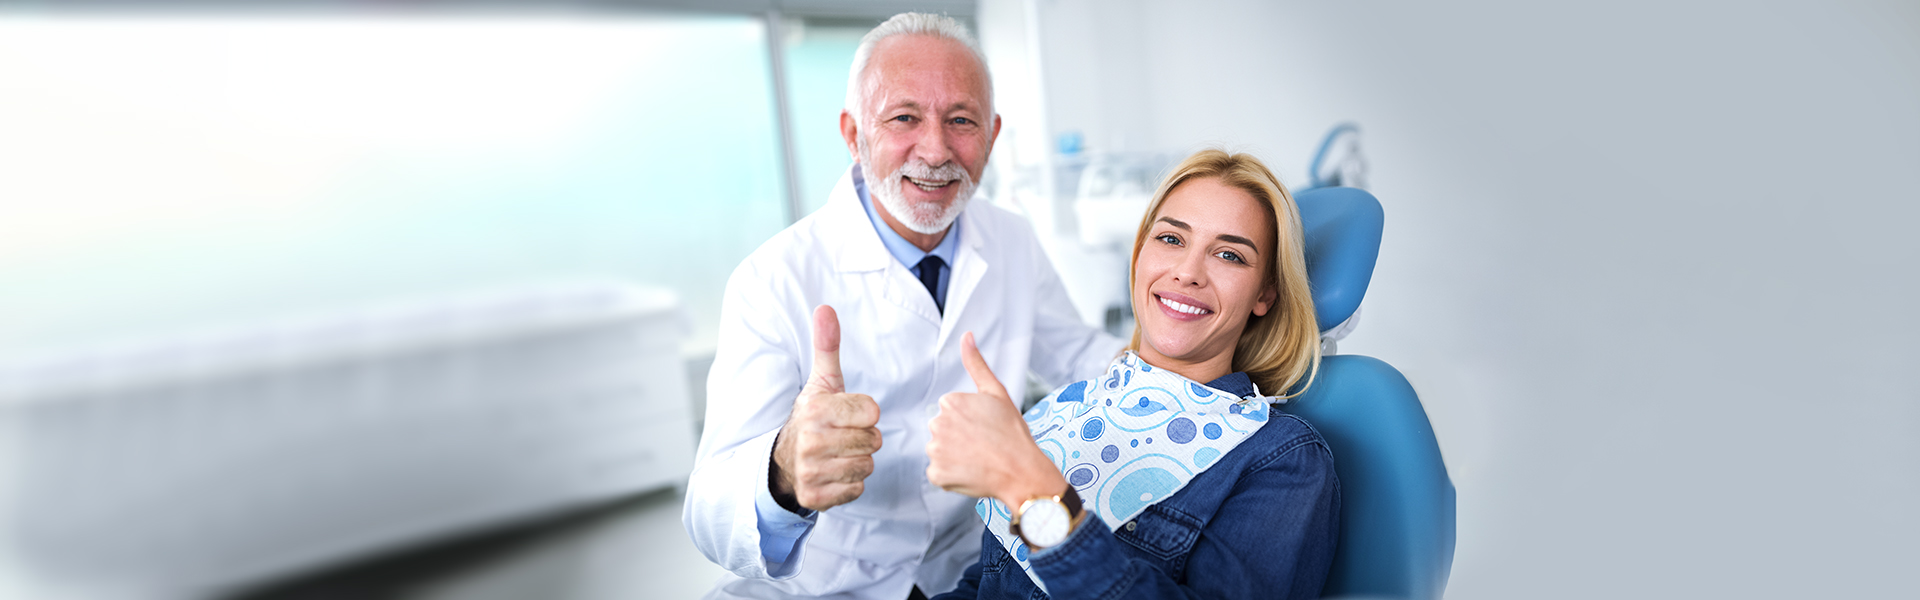 How Can I Get a Root Canal With No Money?